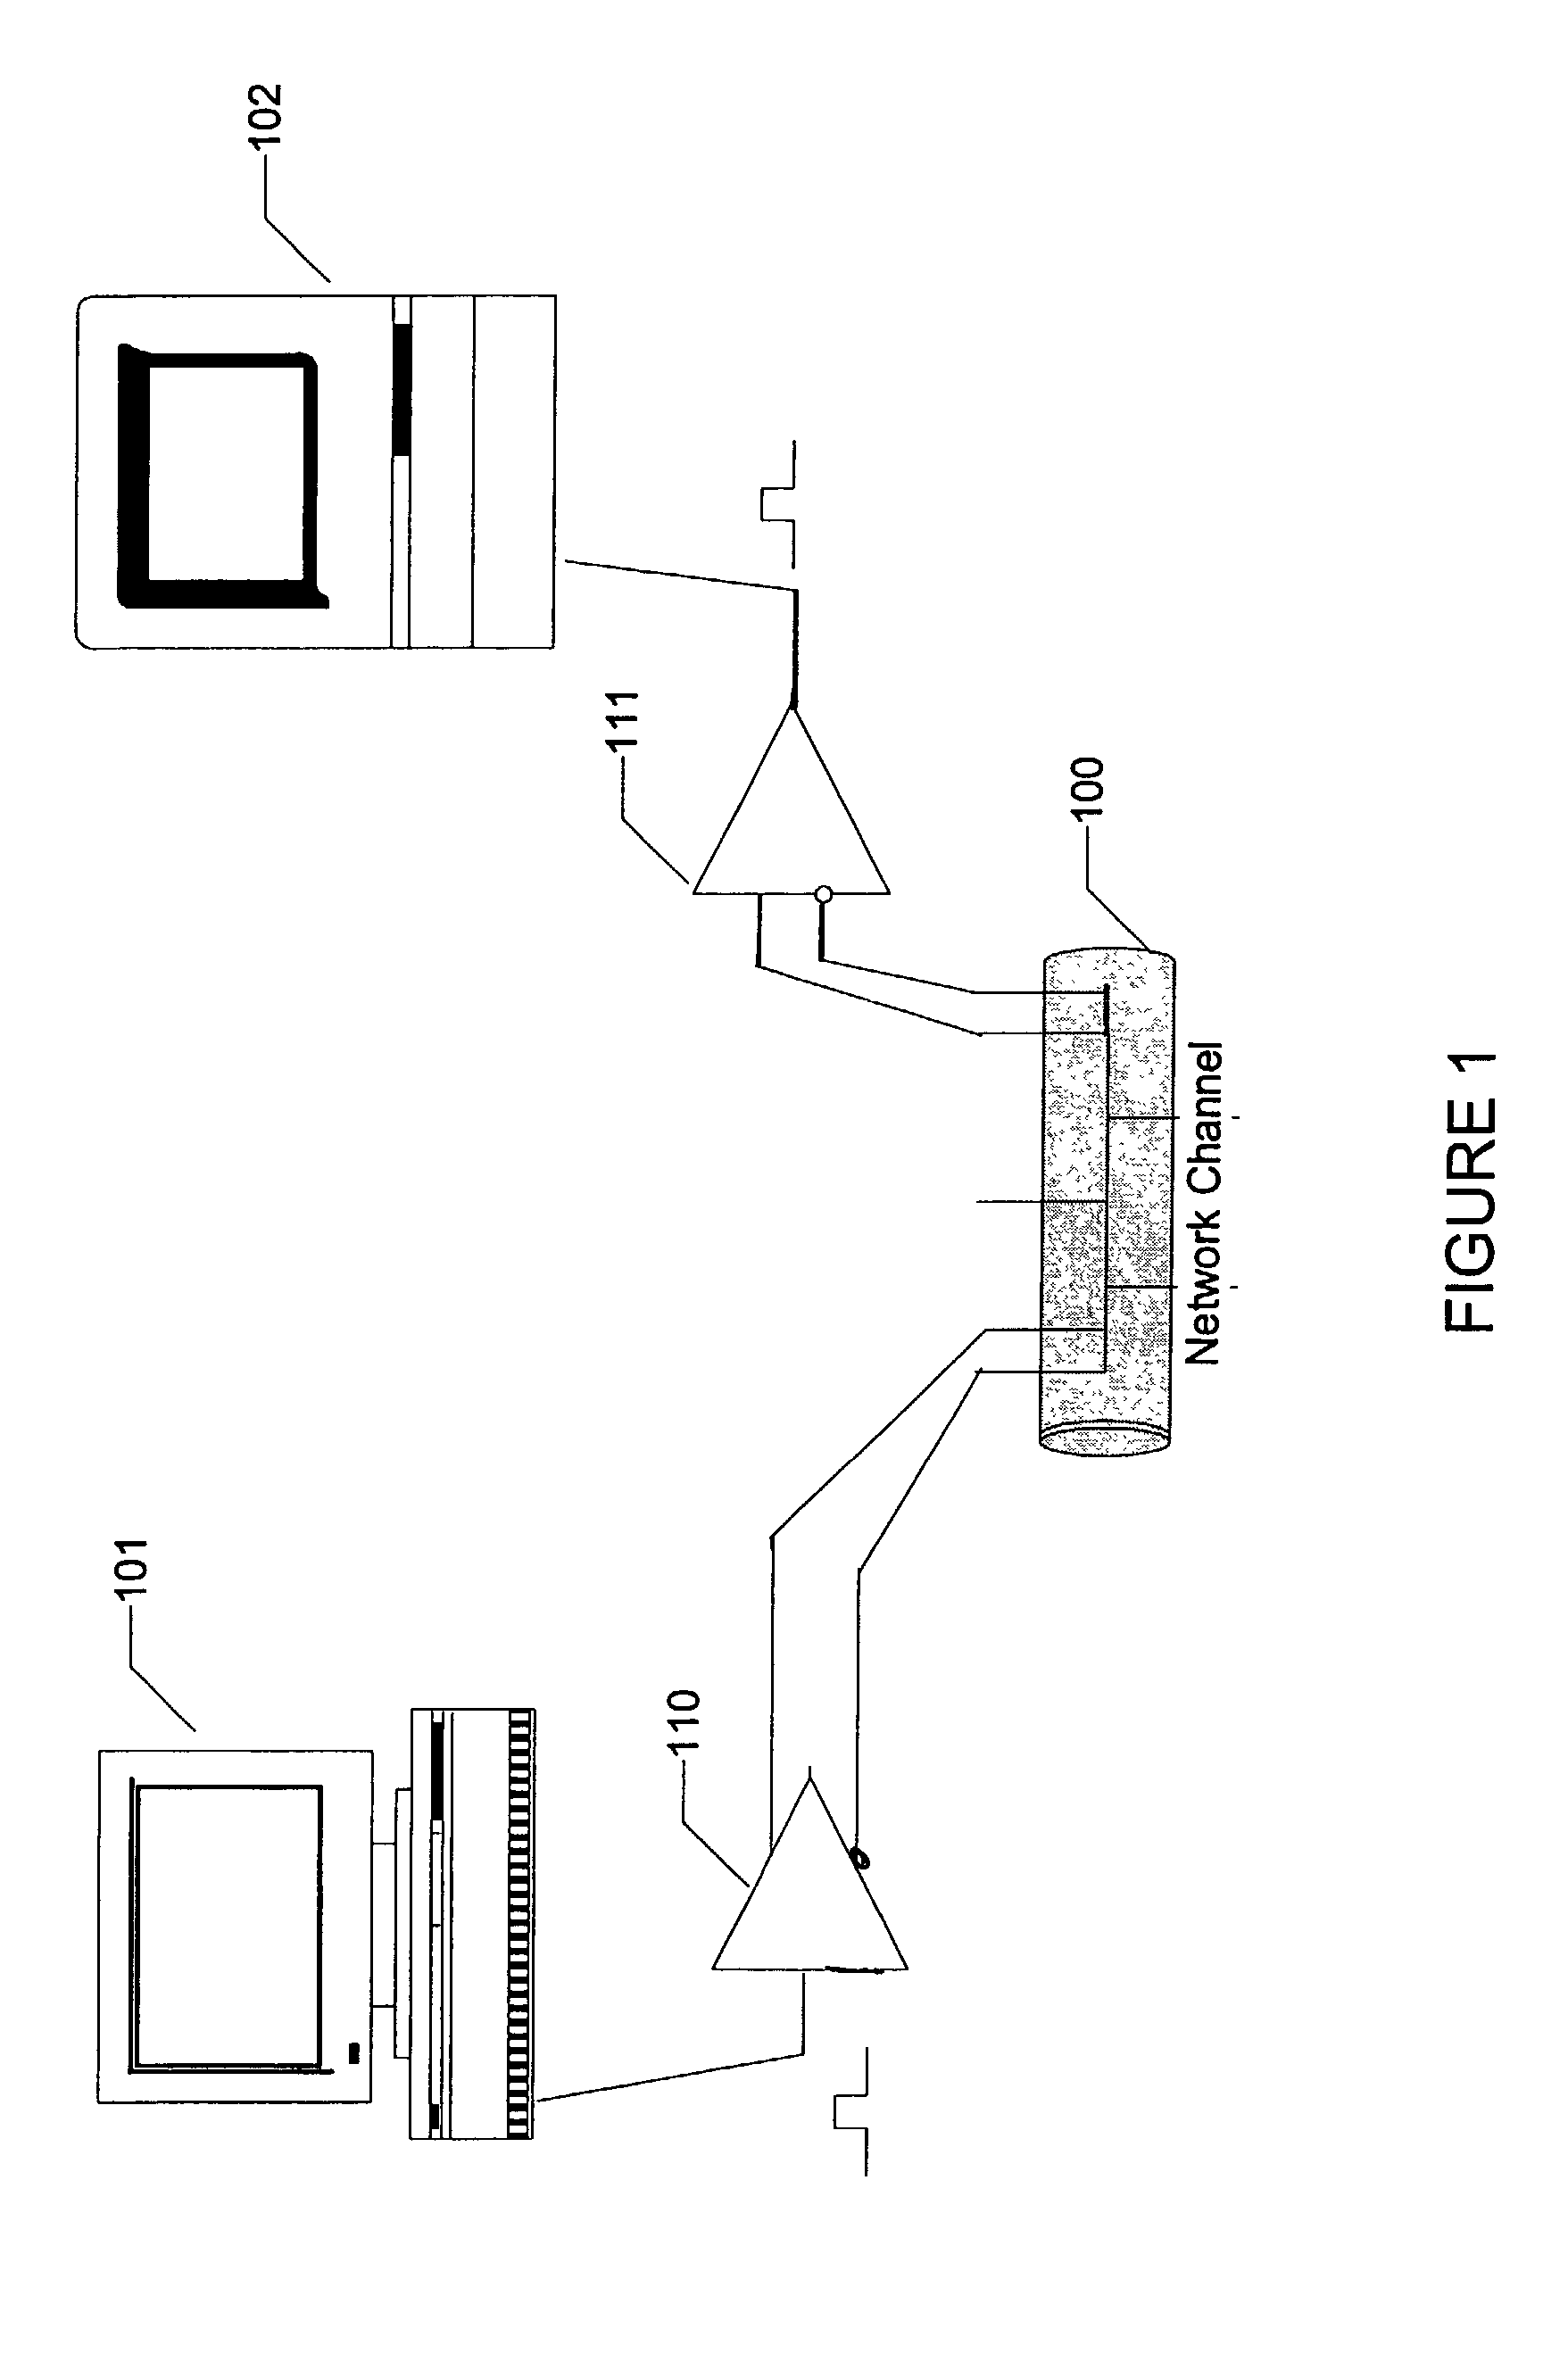 System and method for providing variable delay FIR equalizer for serial baseband communications